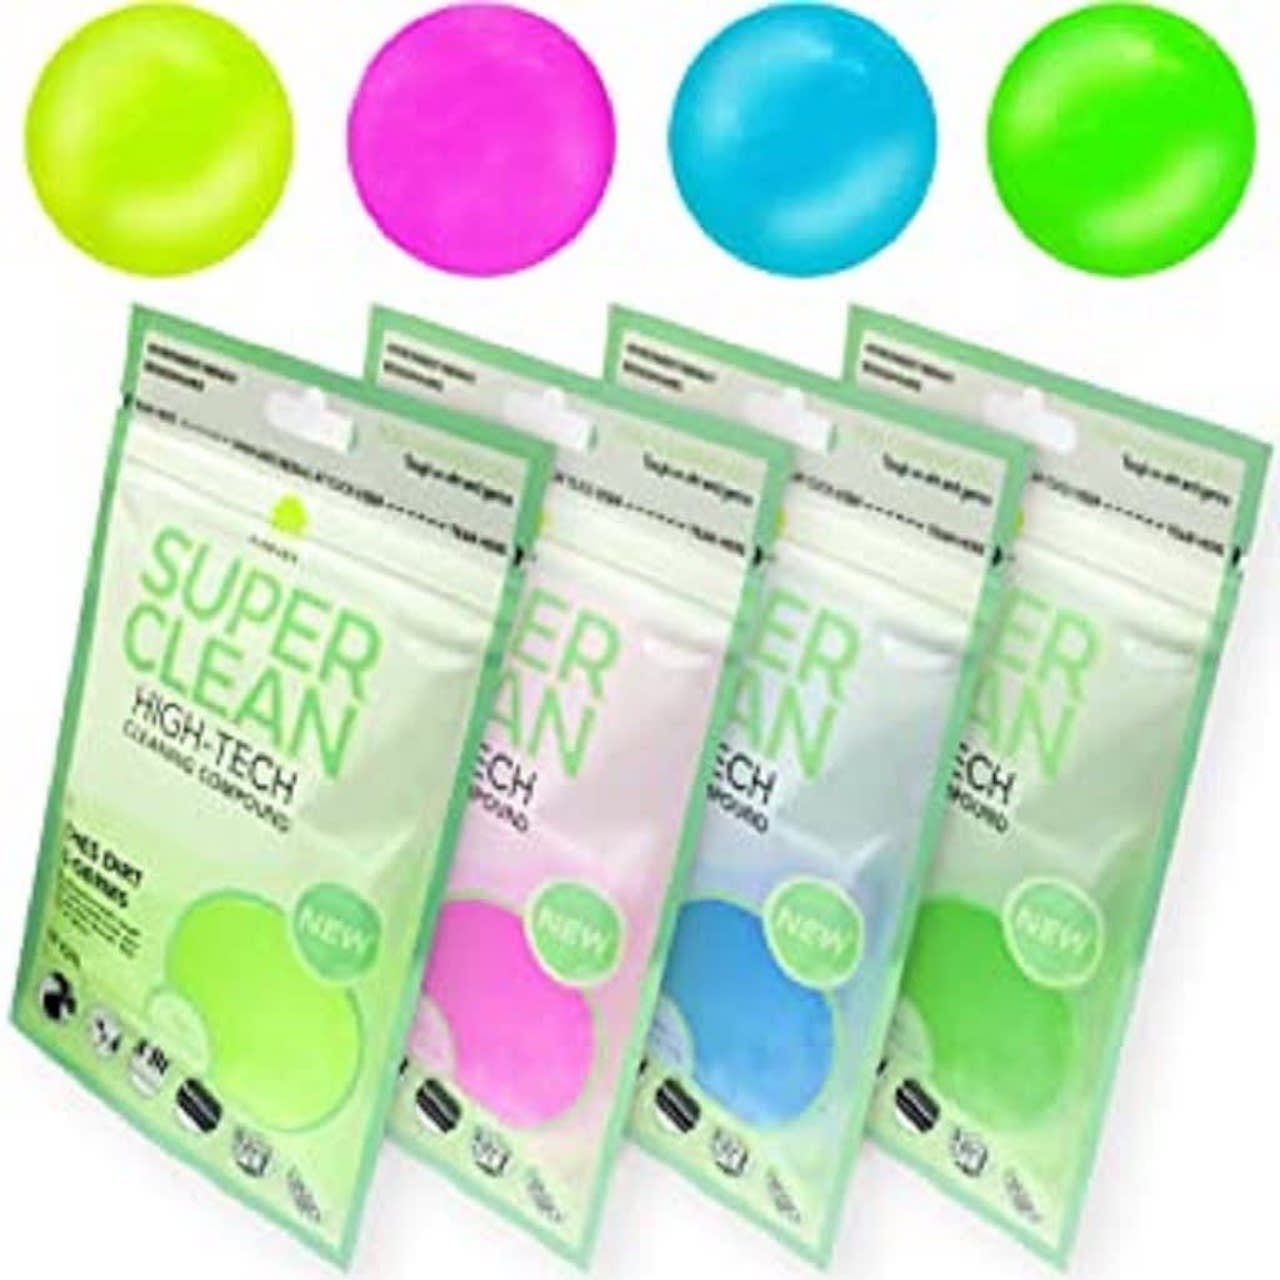 FiveJoy Universal Cleaning Gel packets in yellow, pink, blue, and green